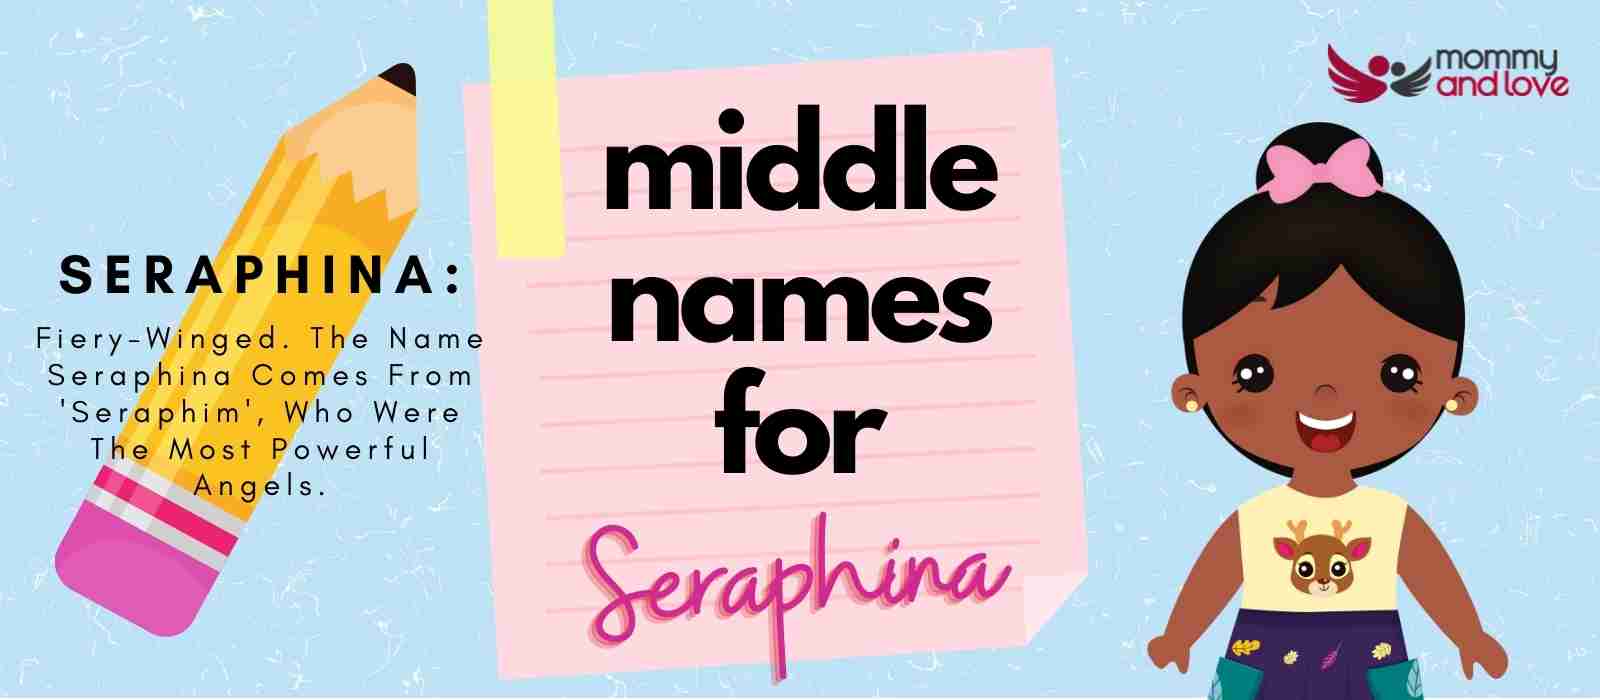 Middle Names for Seraphina